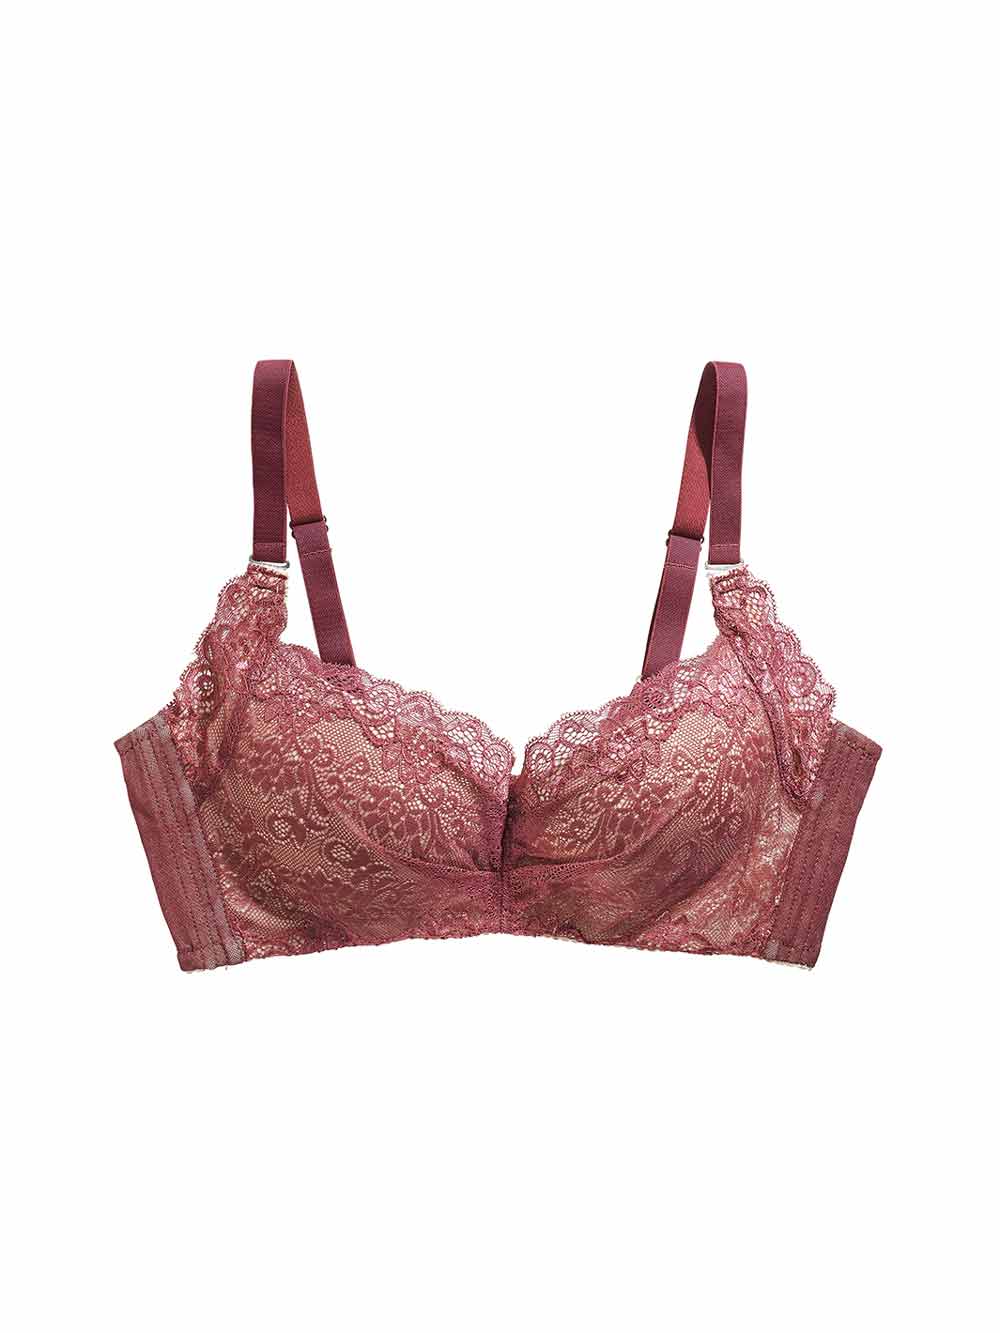 Elegant Lace Bras for a Feminine and Flattering Look